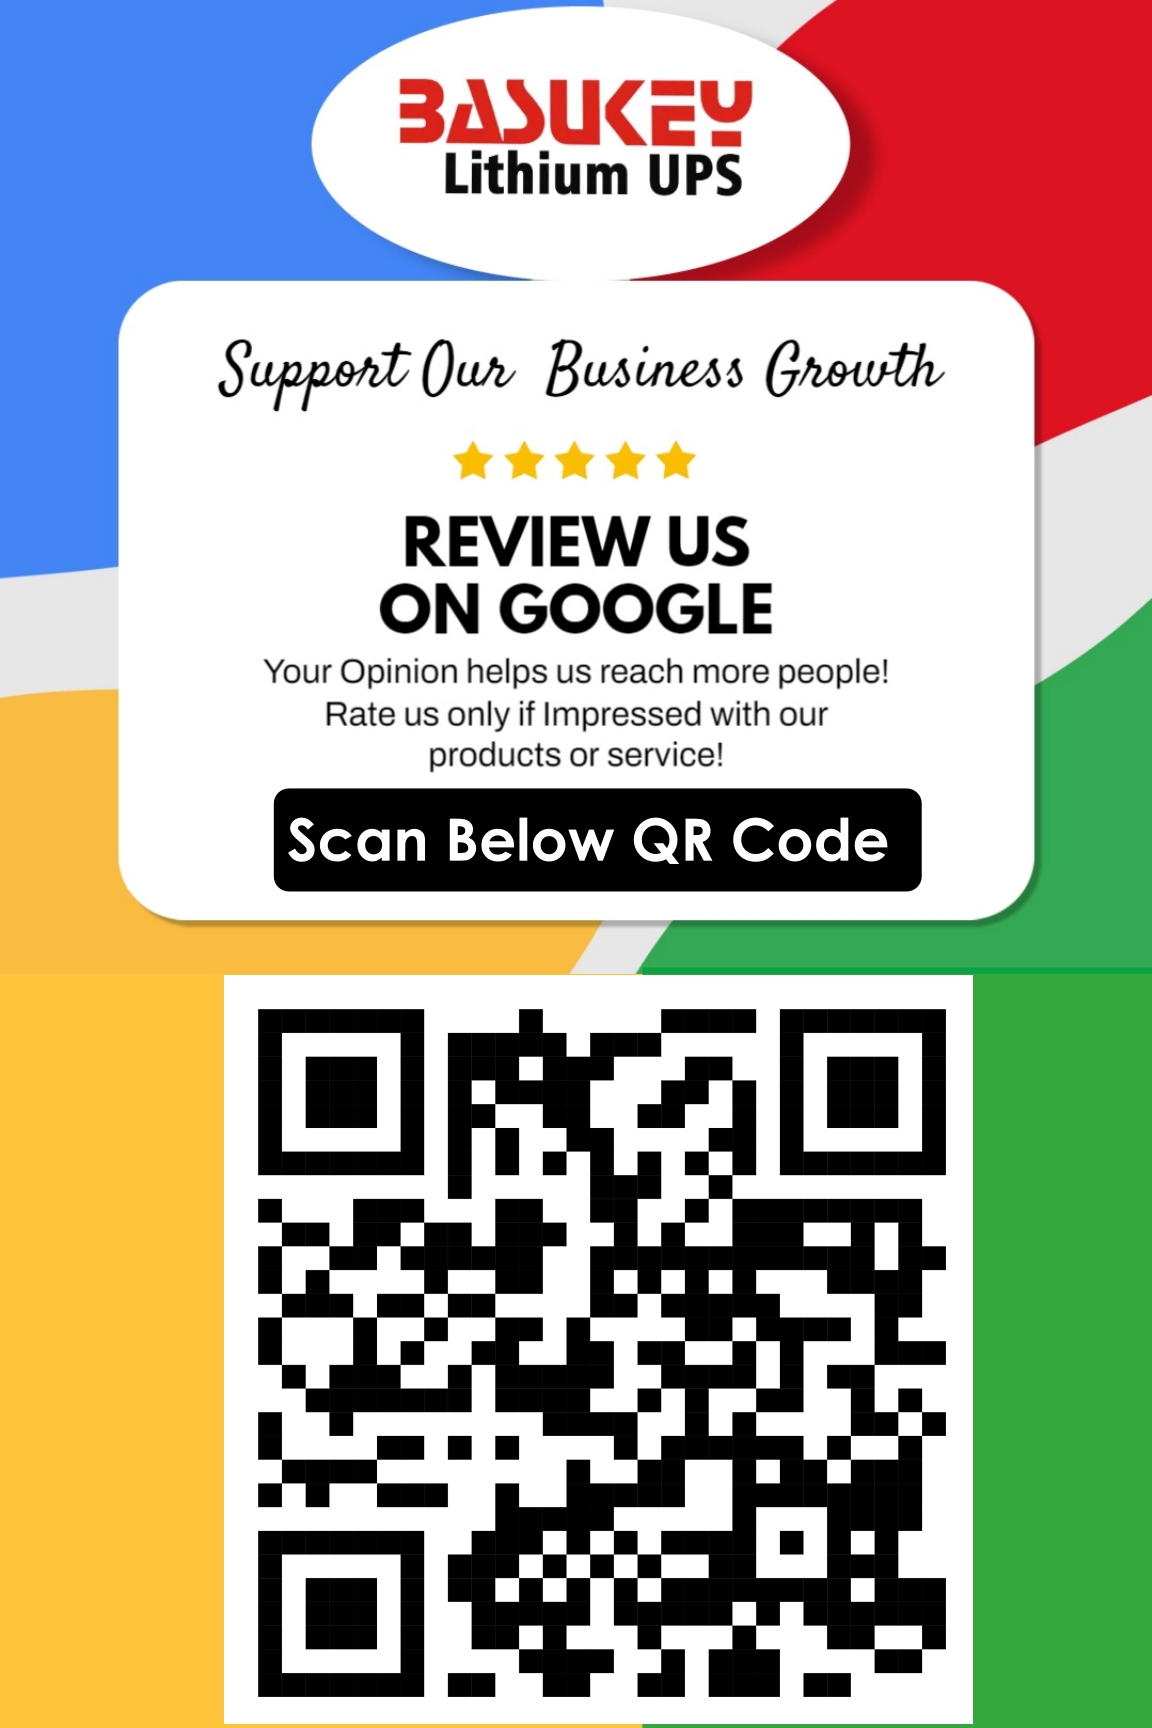 To update the review pls scan this QR Code